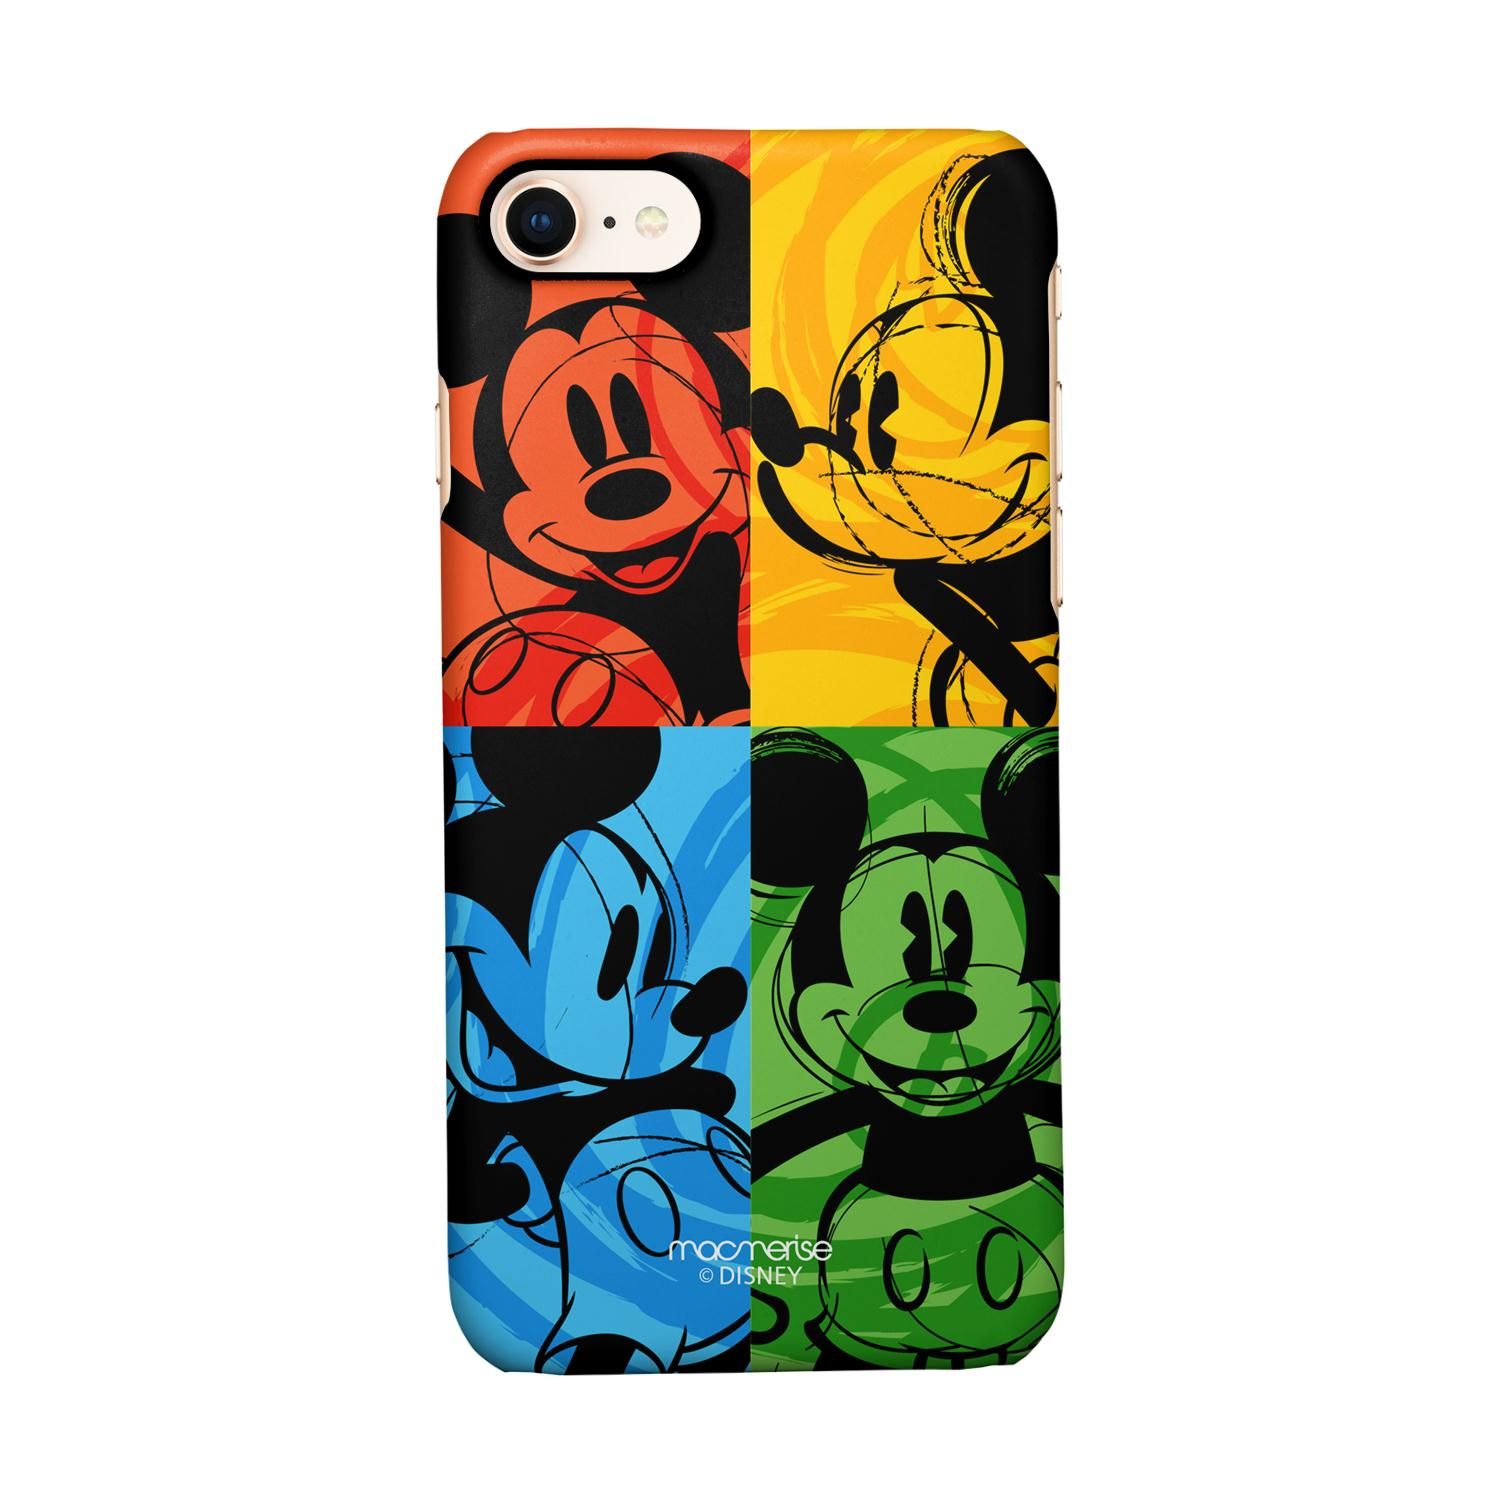 Buy Shades of Mickey - Sleek Phone Case for iPhone 8 Online